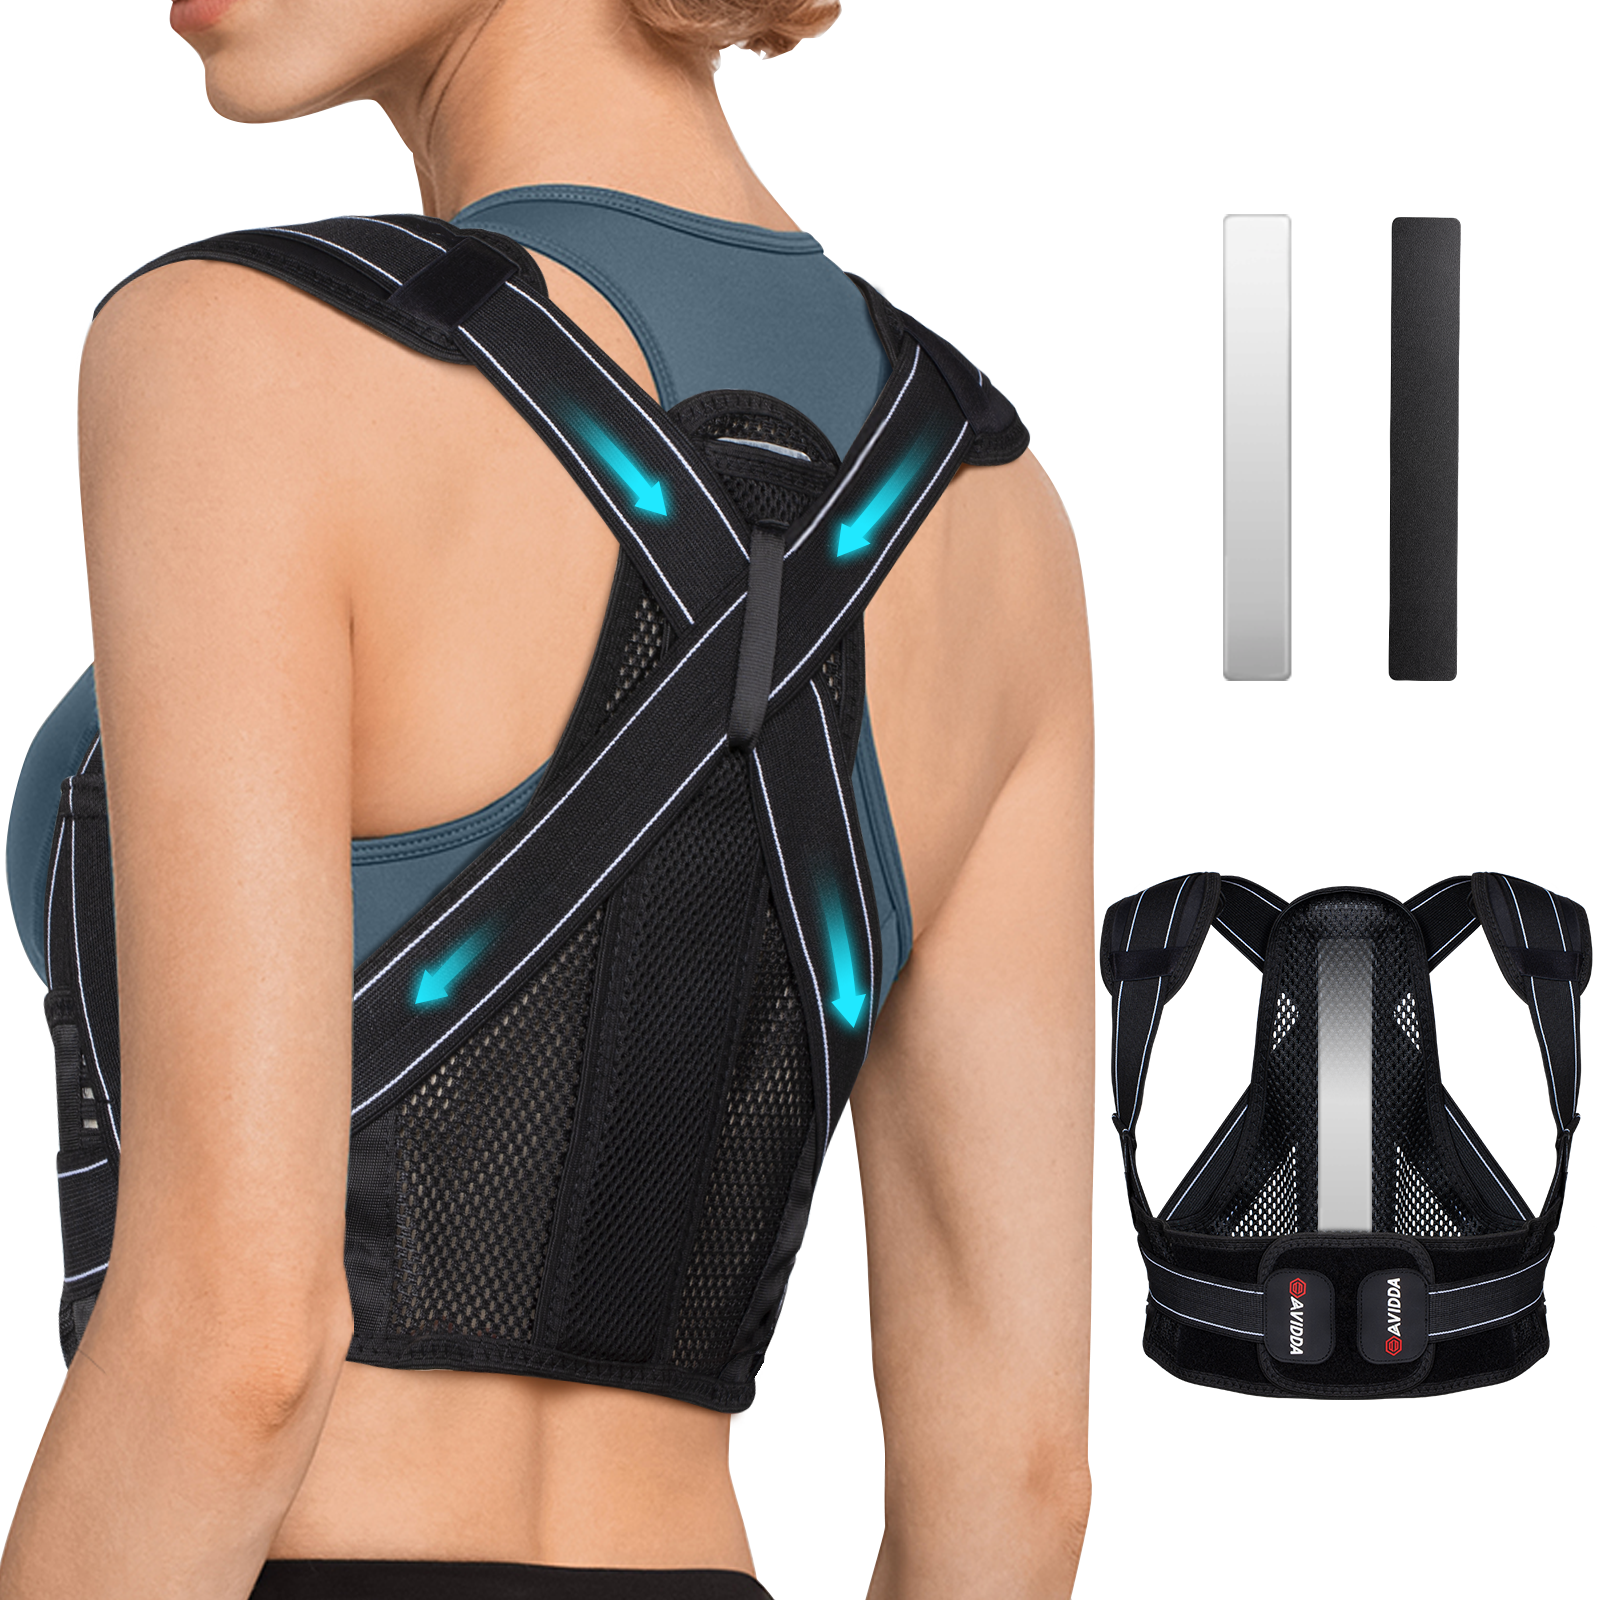 AVIDDA Posture Corrector for Men Women, Back Brace with Replaceable Support Plate, Breathable and Adjustable Back Support Providing Pain Relief from Back, Neck & Shoulder